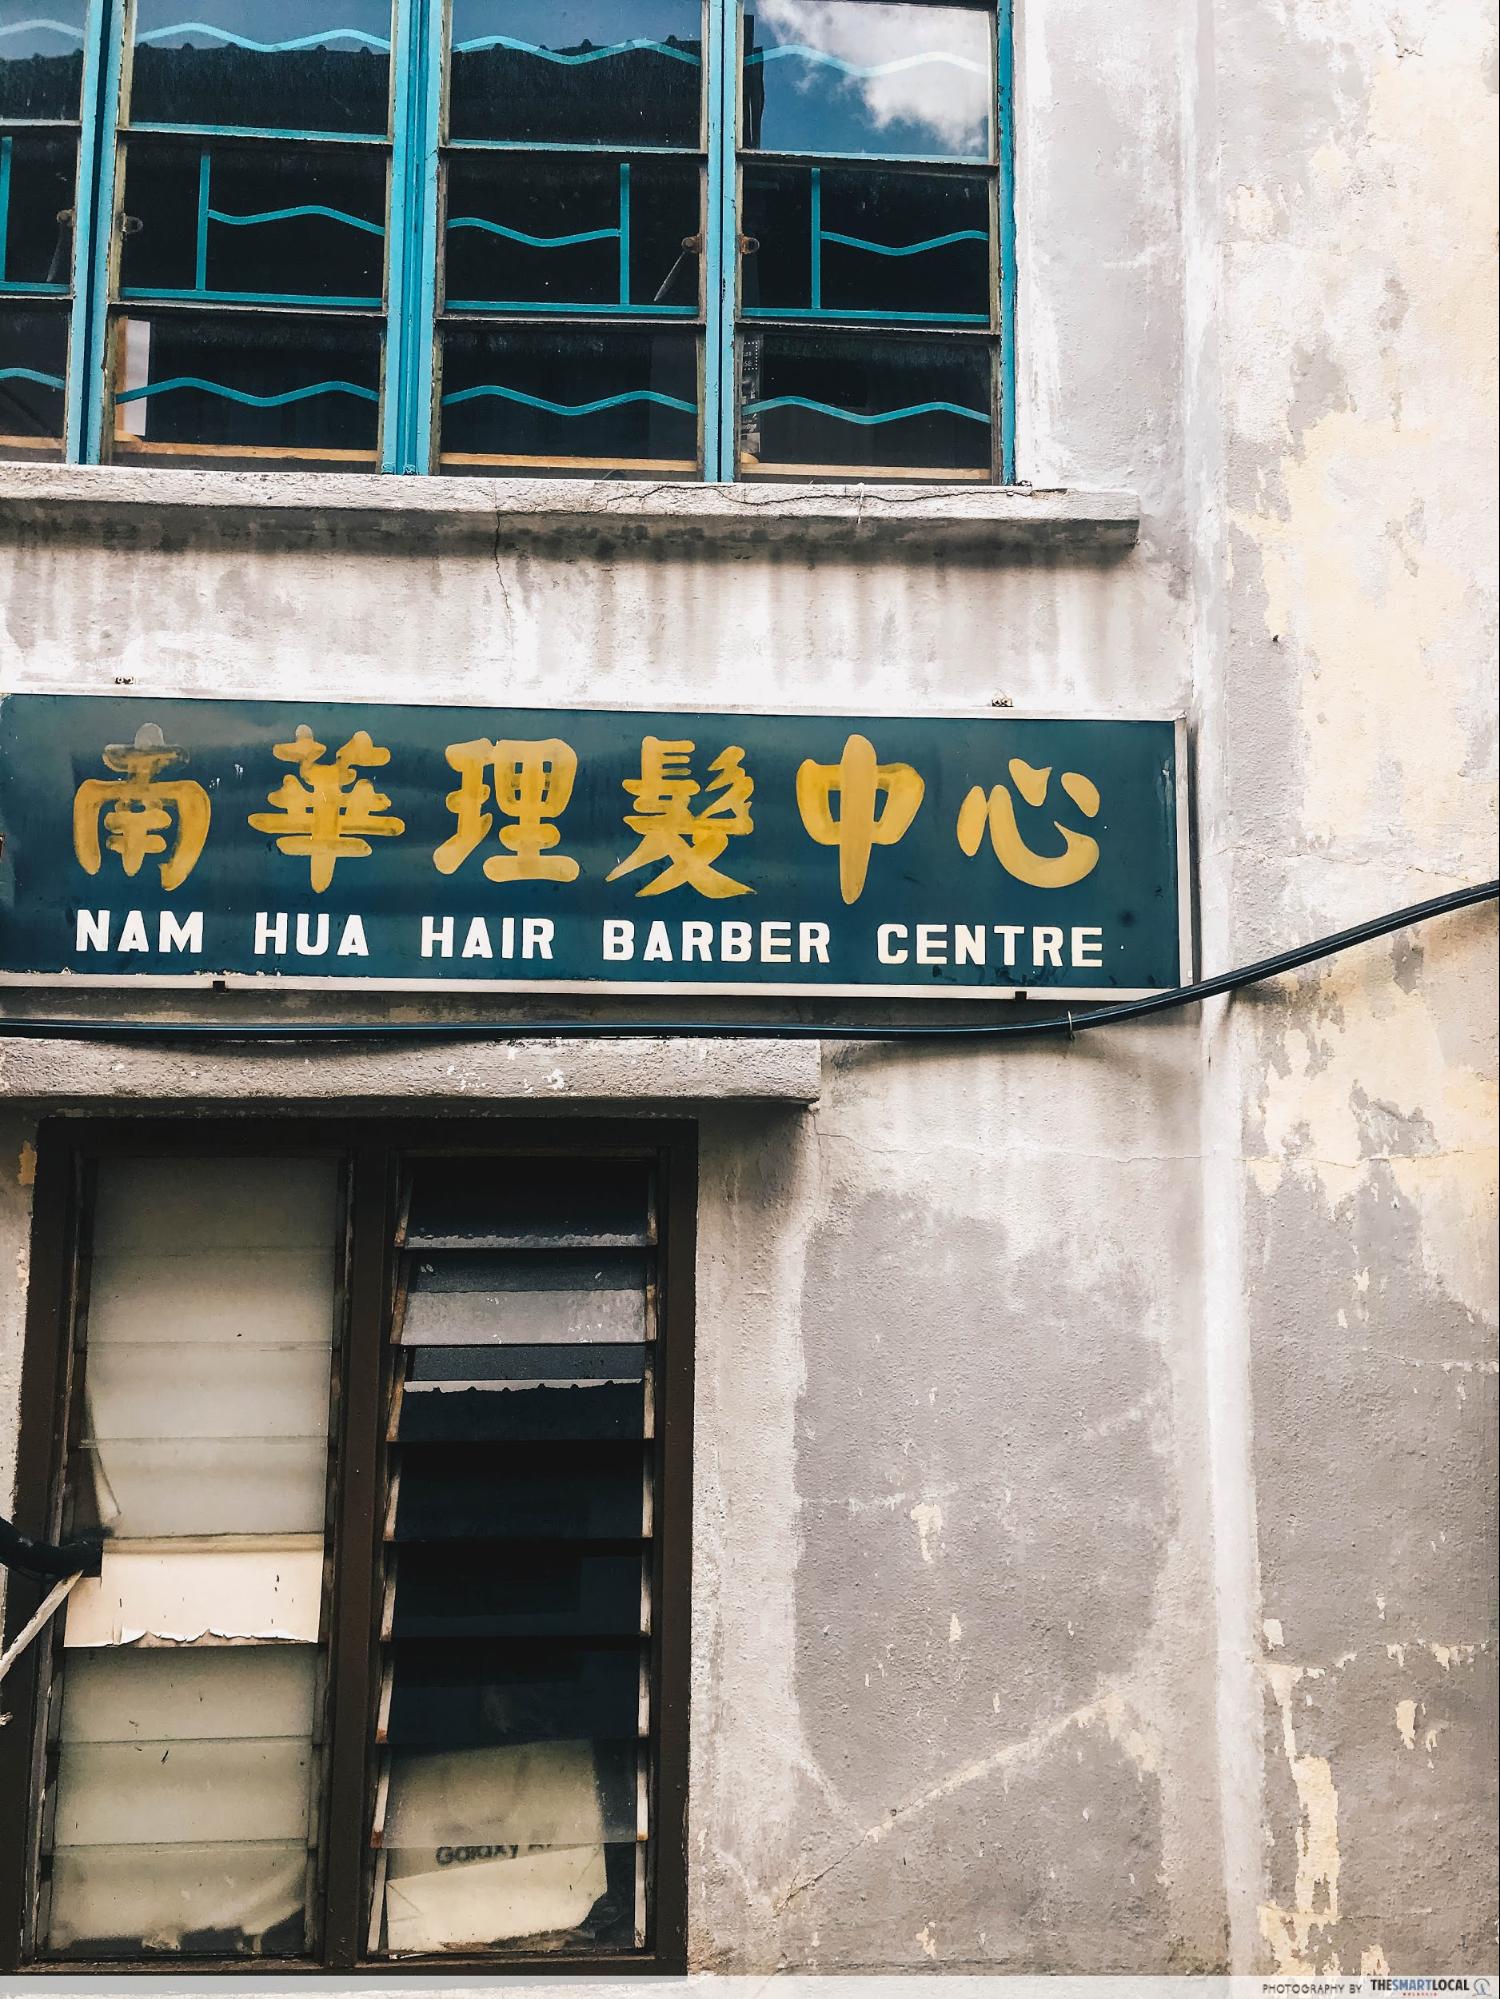 An old-school barber shop found in Chinatown, Kuching